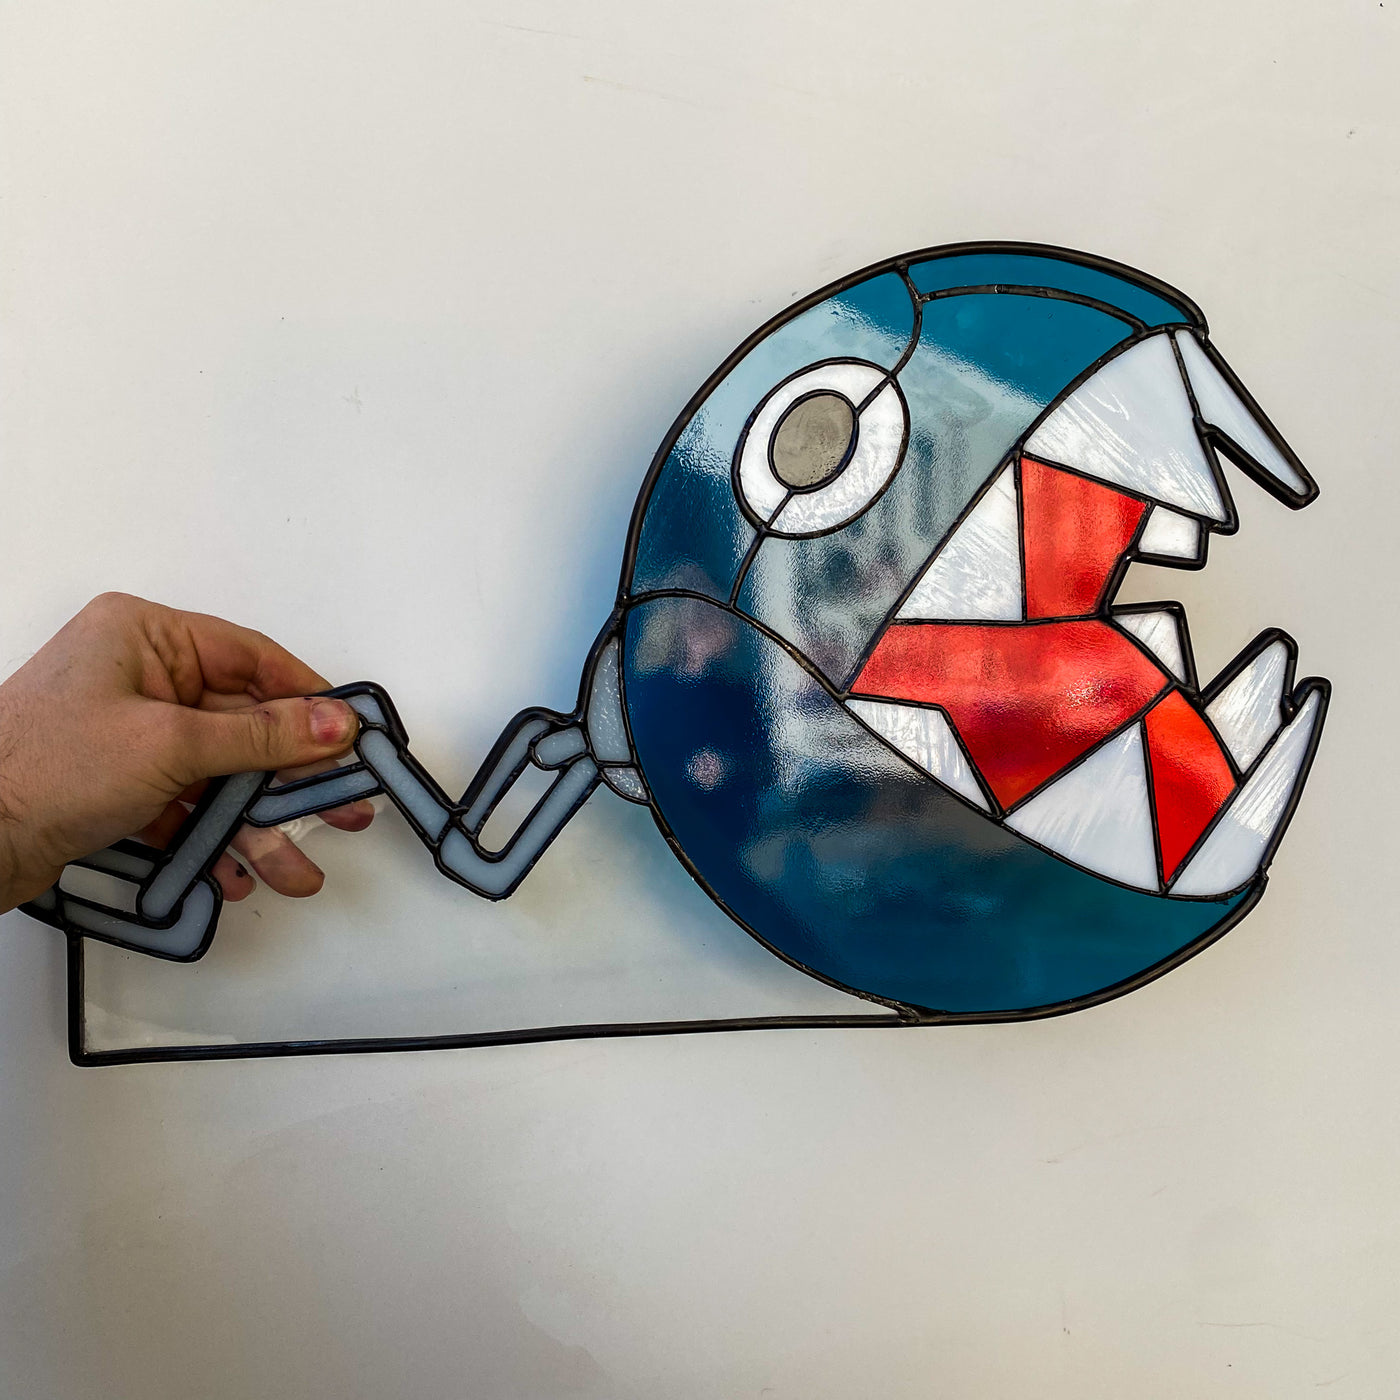 Chain Chomp Inspired Stained Glass Art